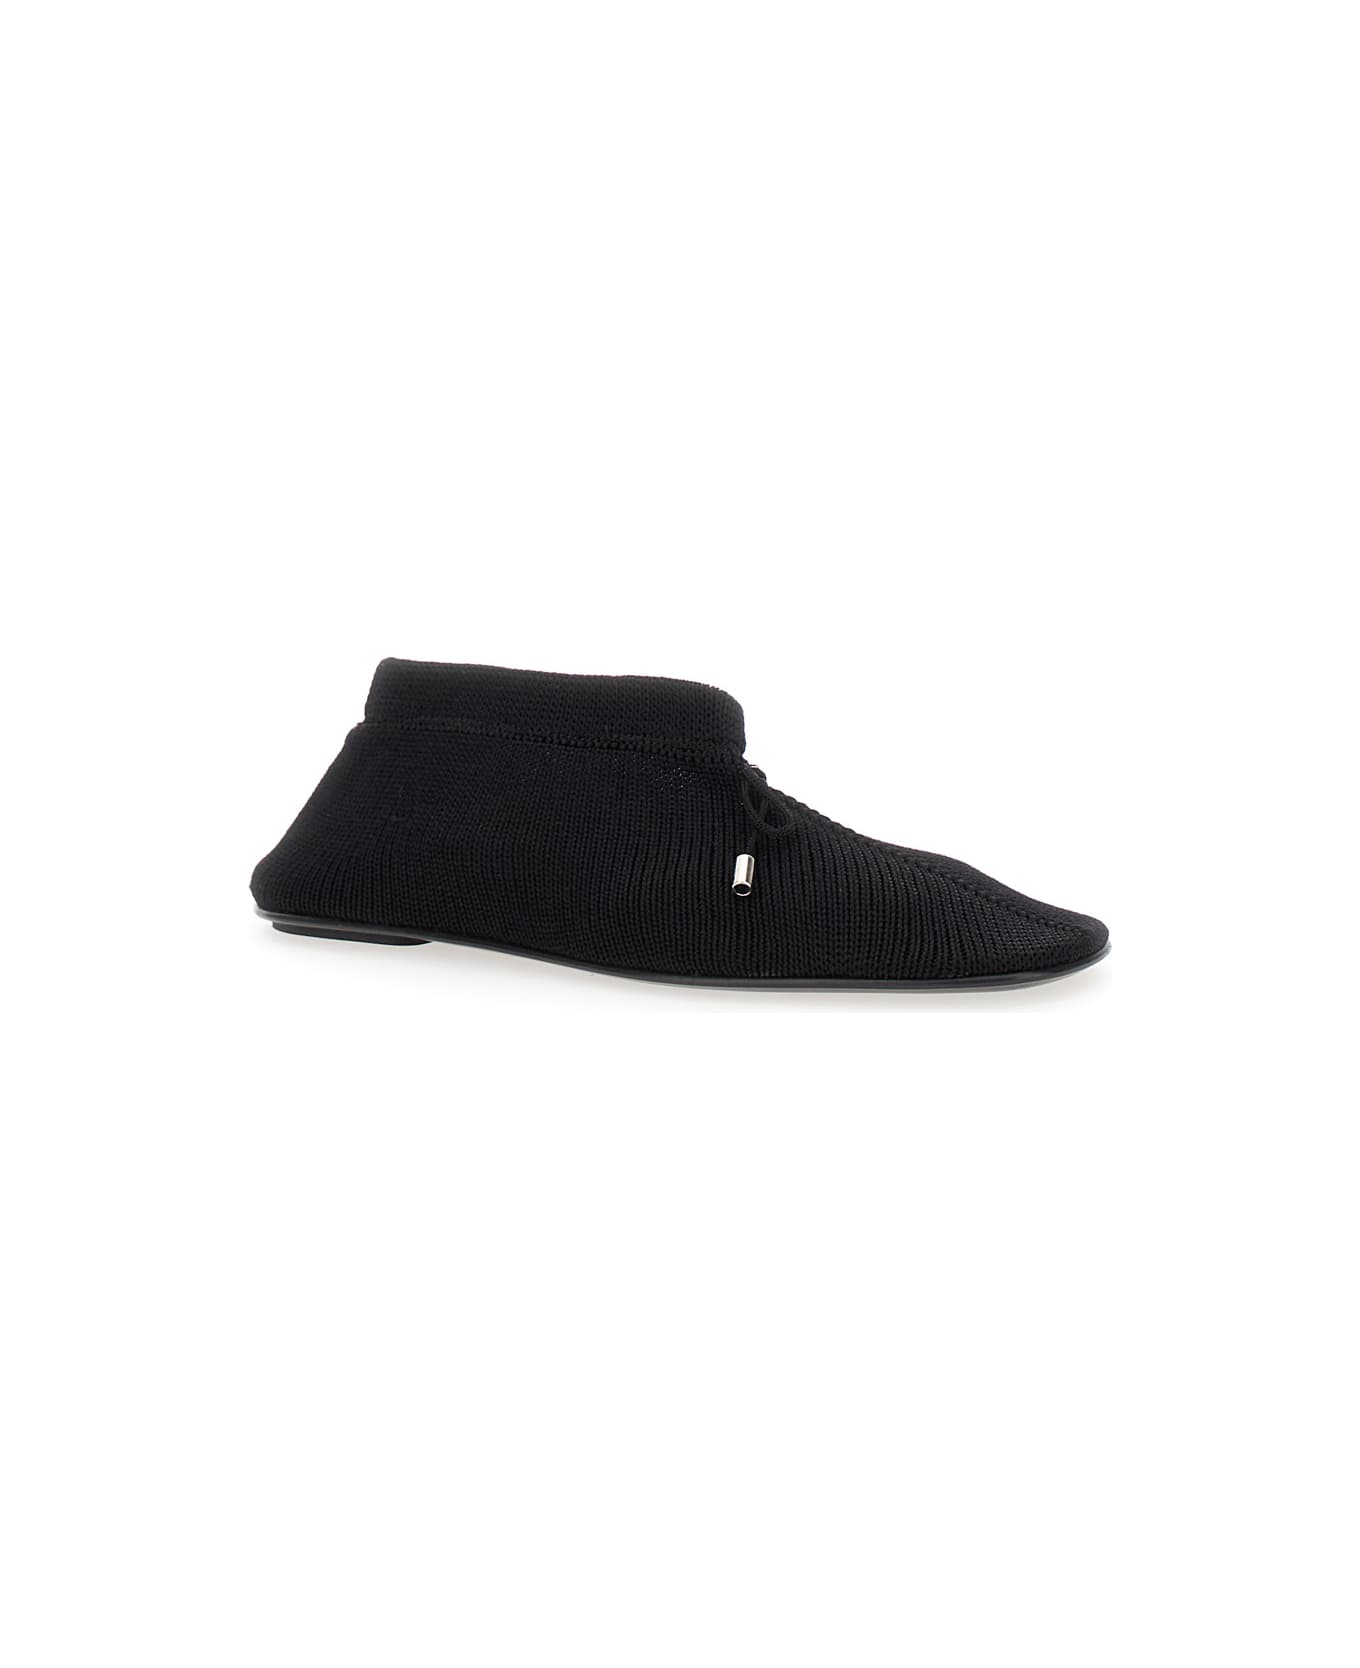 Totême Black Ballet Flats With Bow Detail In Knit Woman - Black フラットシューズ